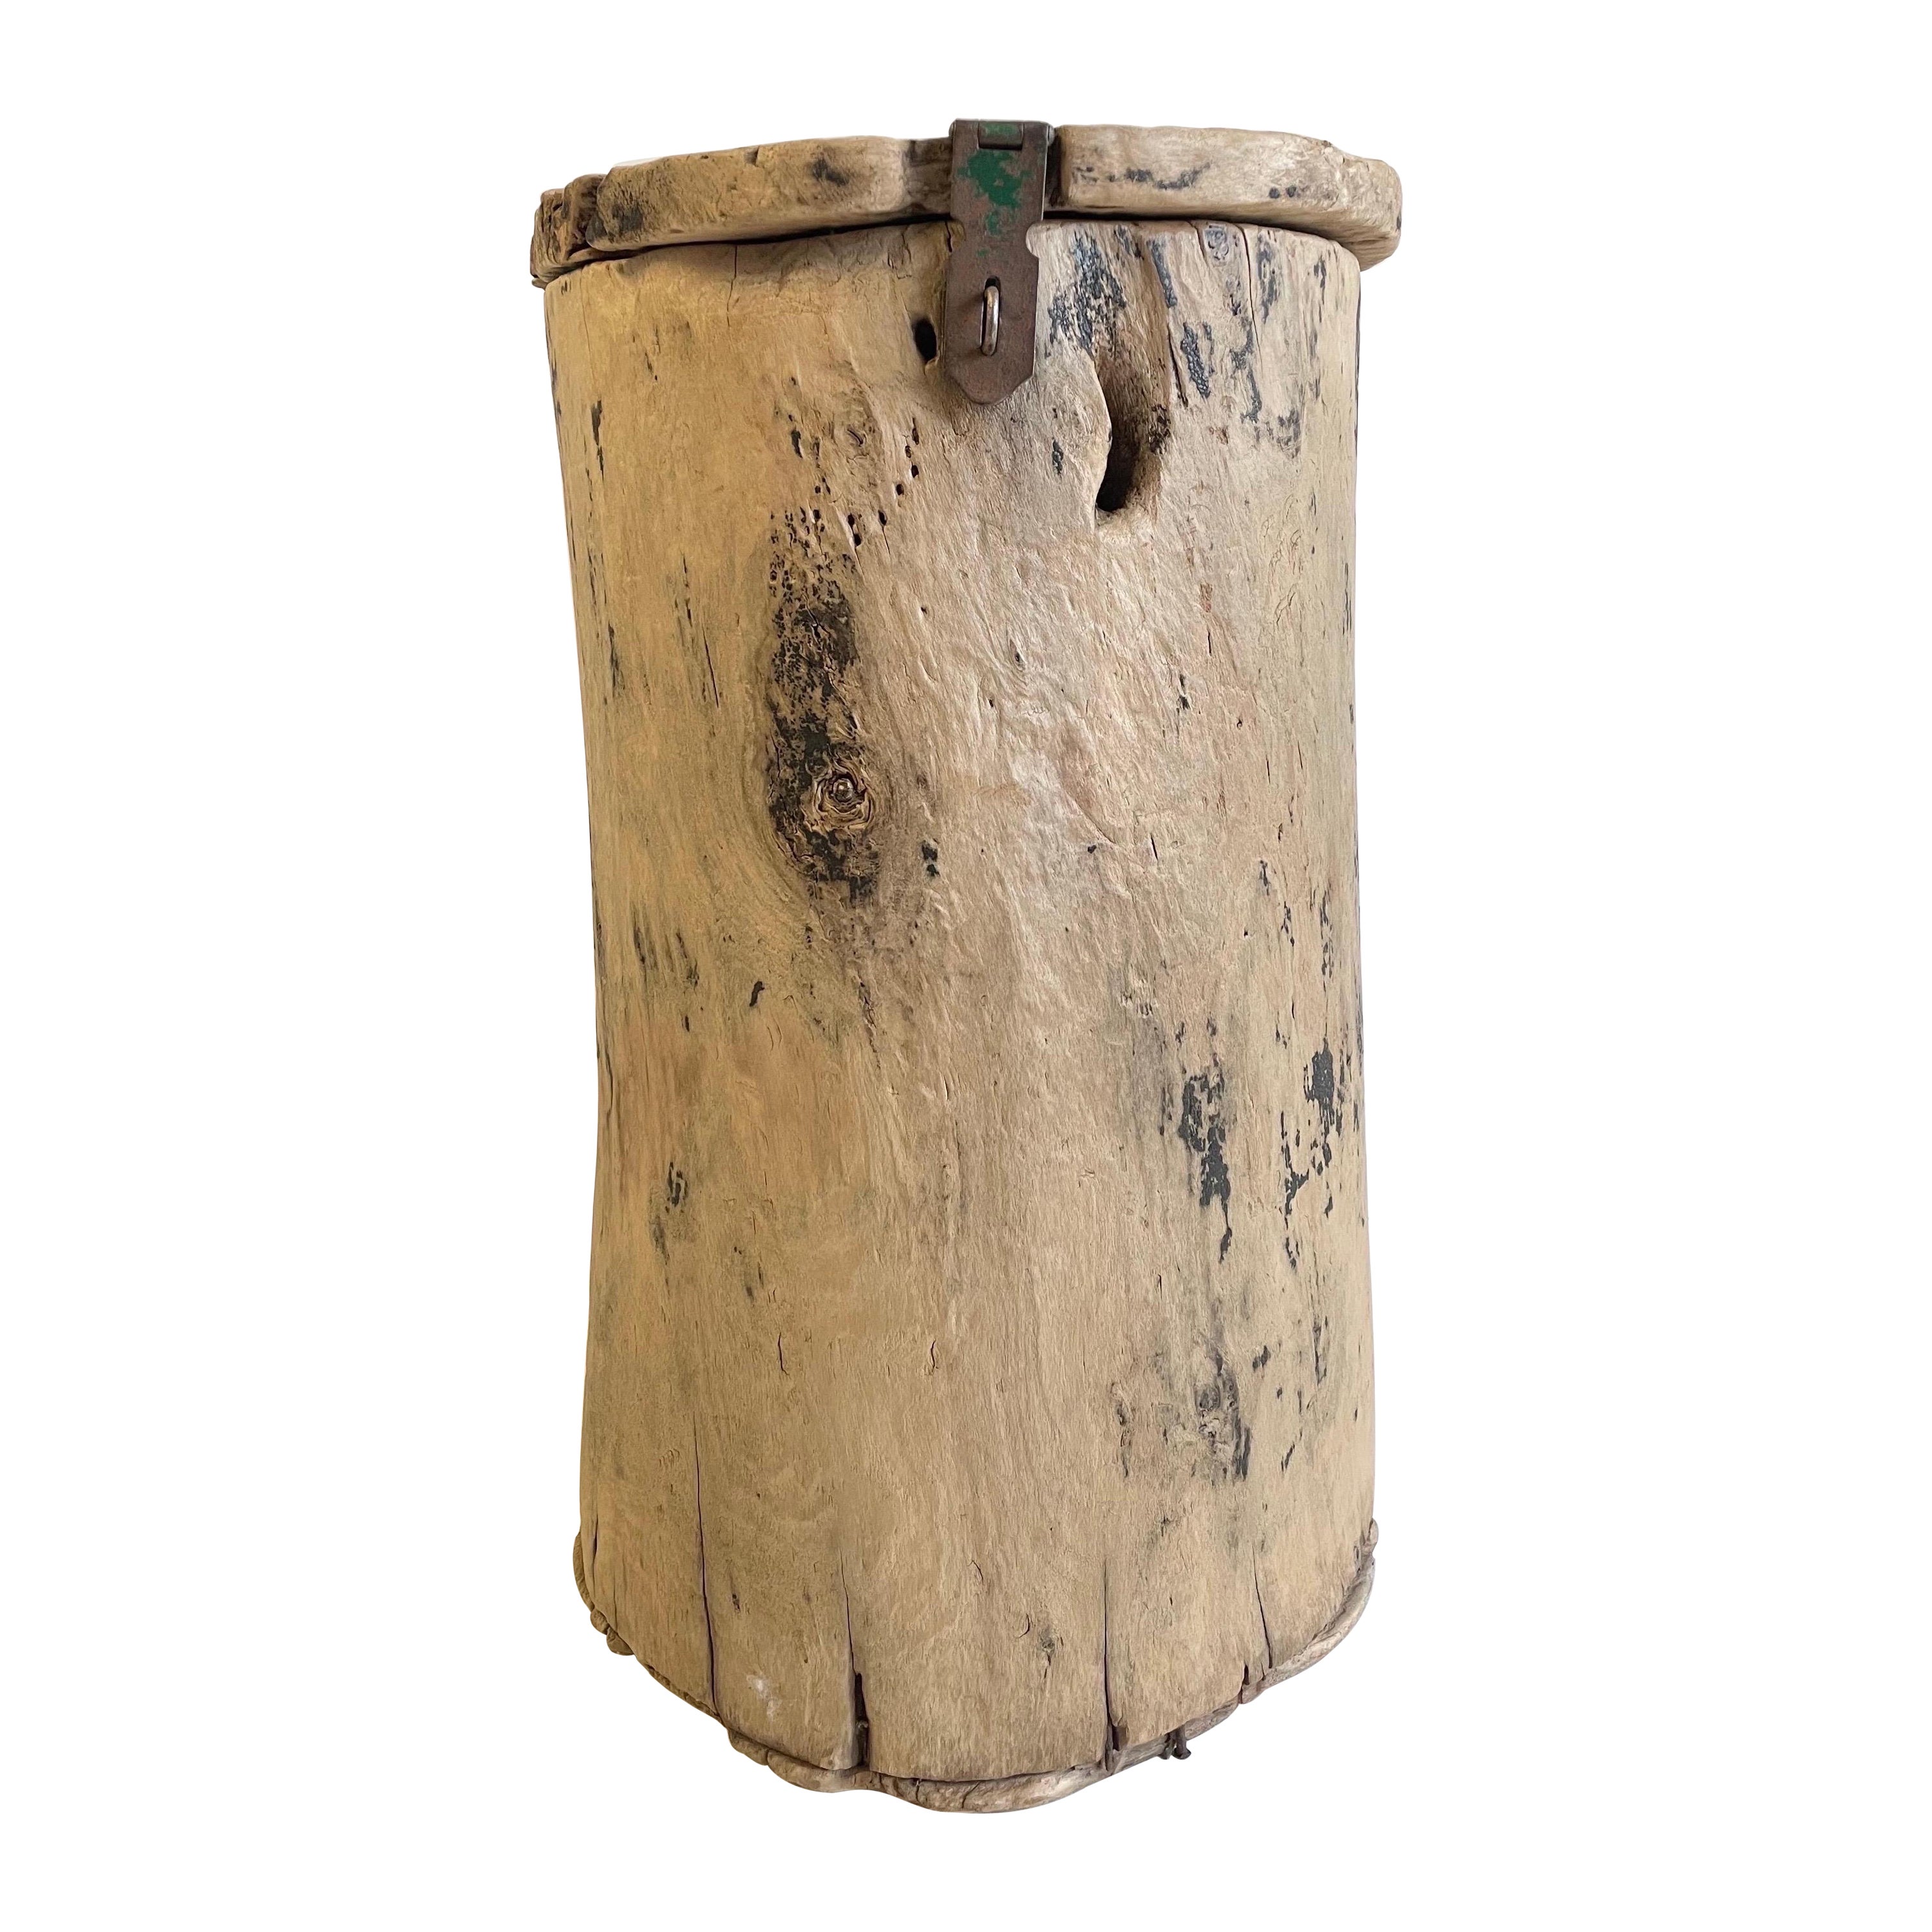 Cypress Wood Side Table Carved From a Stump Bucket with Lid For Sale